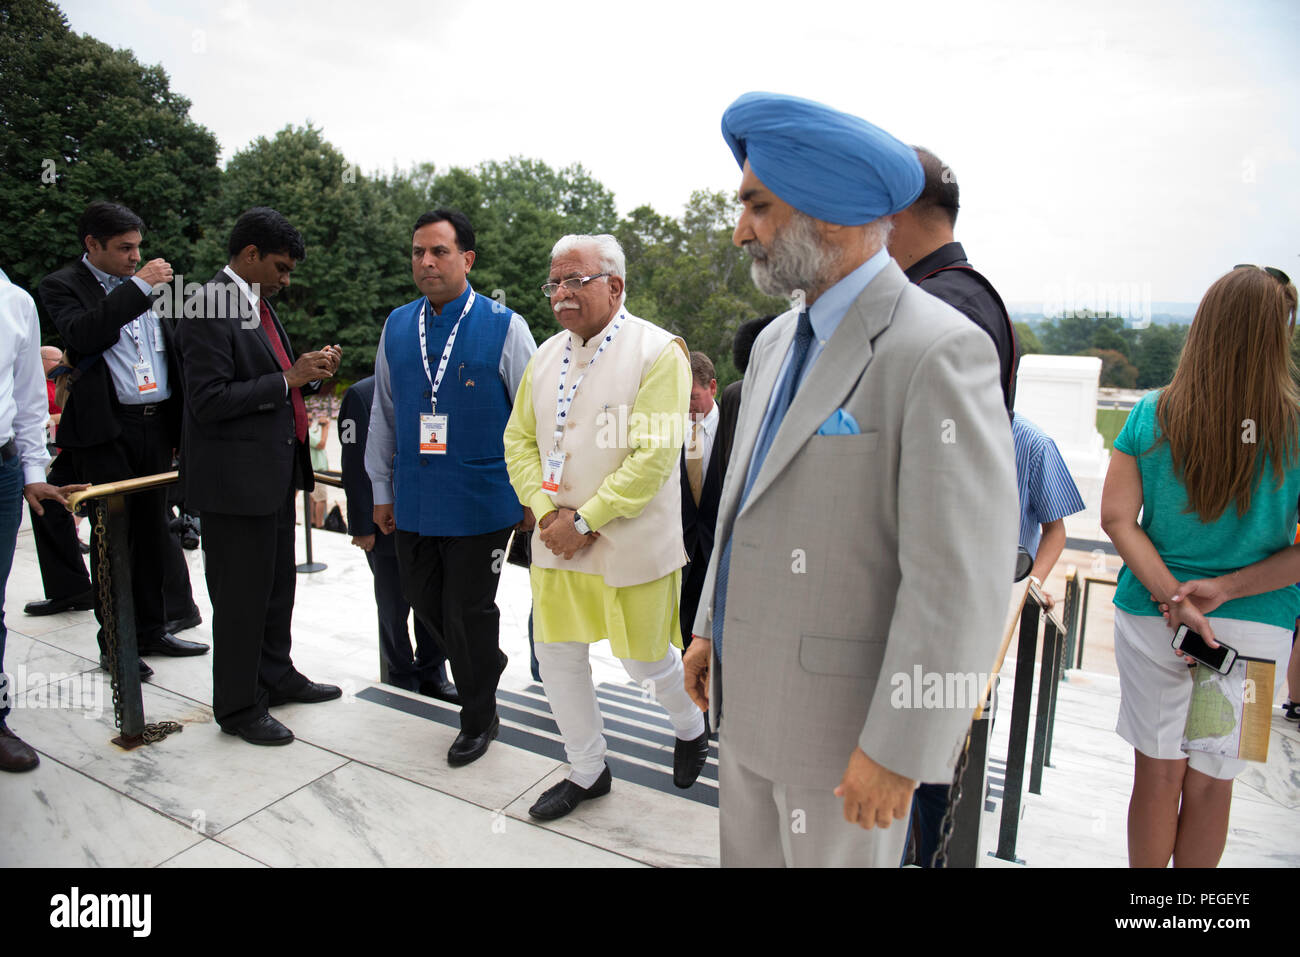 Chief Minister of Haryana, India Manohar Lal Khattar, along with others in the official party and other visitors, walk toward the Memorial Display Room after watching a Changing of the Guard ceremony at the Tomb of the Unknown Soldier in Arlington National Cemetery, Aug. 18, 2015, in Arlington, Va., immediately following a wreath-laying at the Space Shuttle Columbia Memorial. Kalpana Chawla, one of seven crew members killed during the Columbia disaster, was born in Karnal, India, and was posthumously awarded the Congressional Space Medal of Honor, the NASA Space Flight Medal, and the NASA Dist Stock Photo